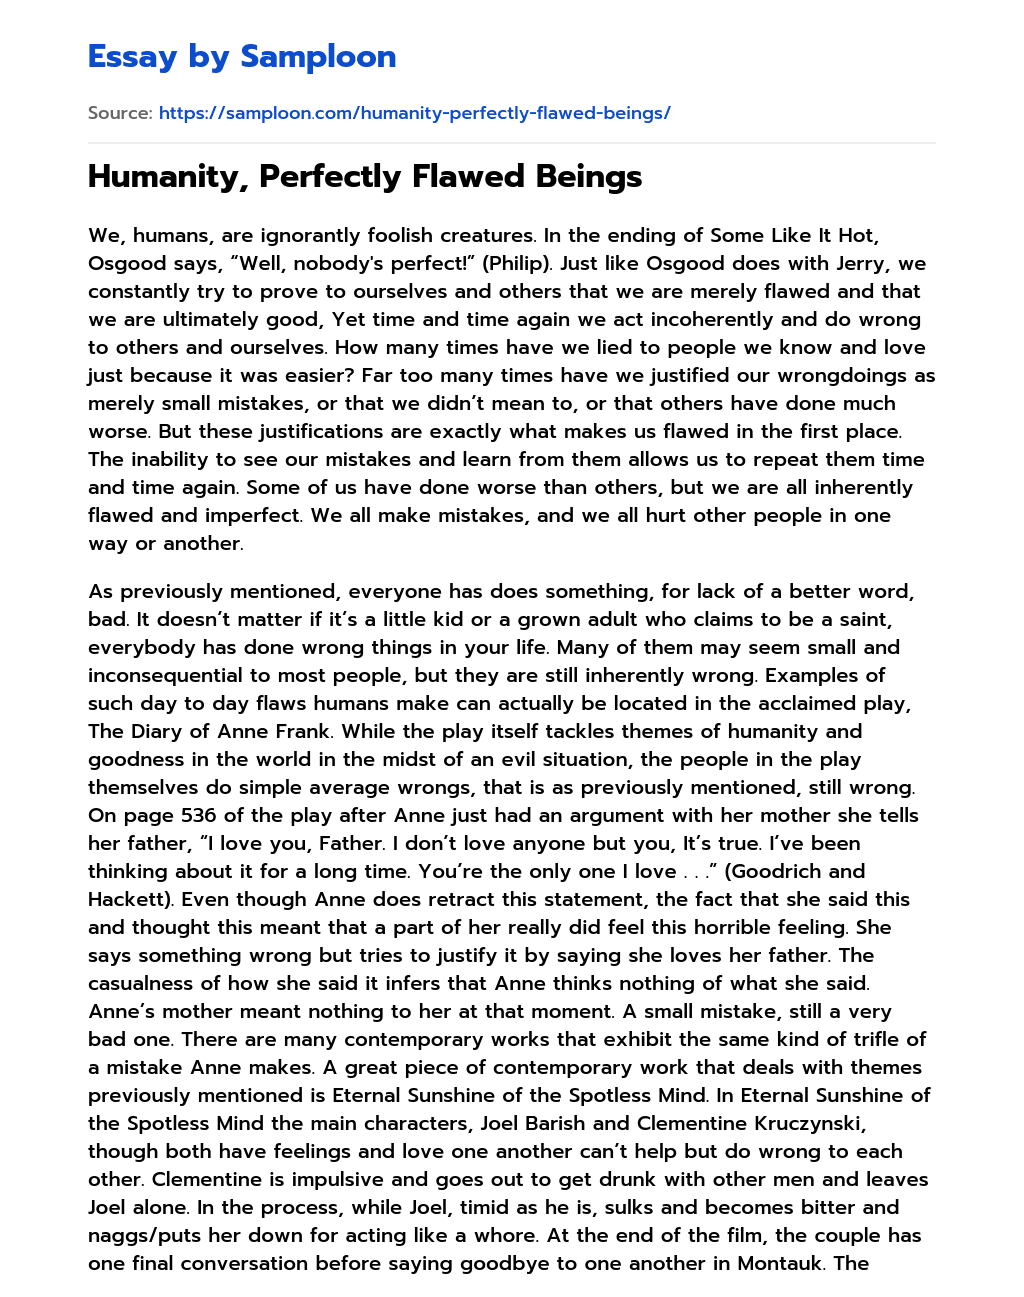 Humanity, Perfectly Flawed Beings essay